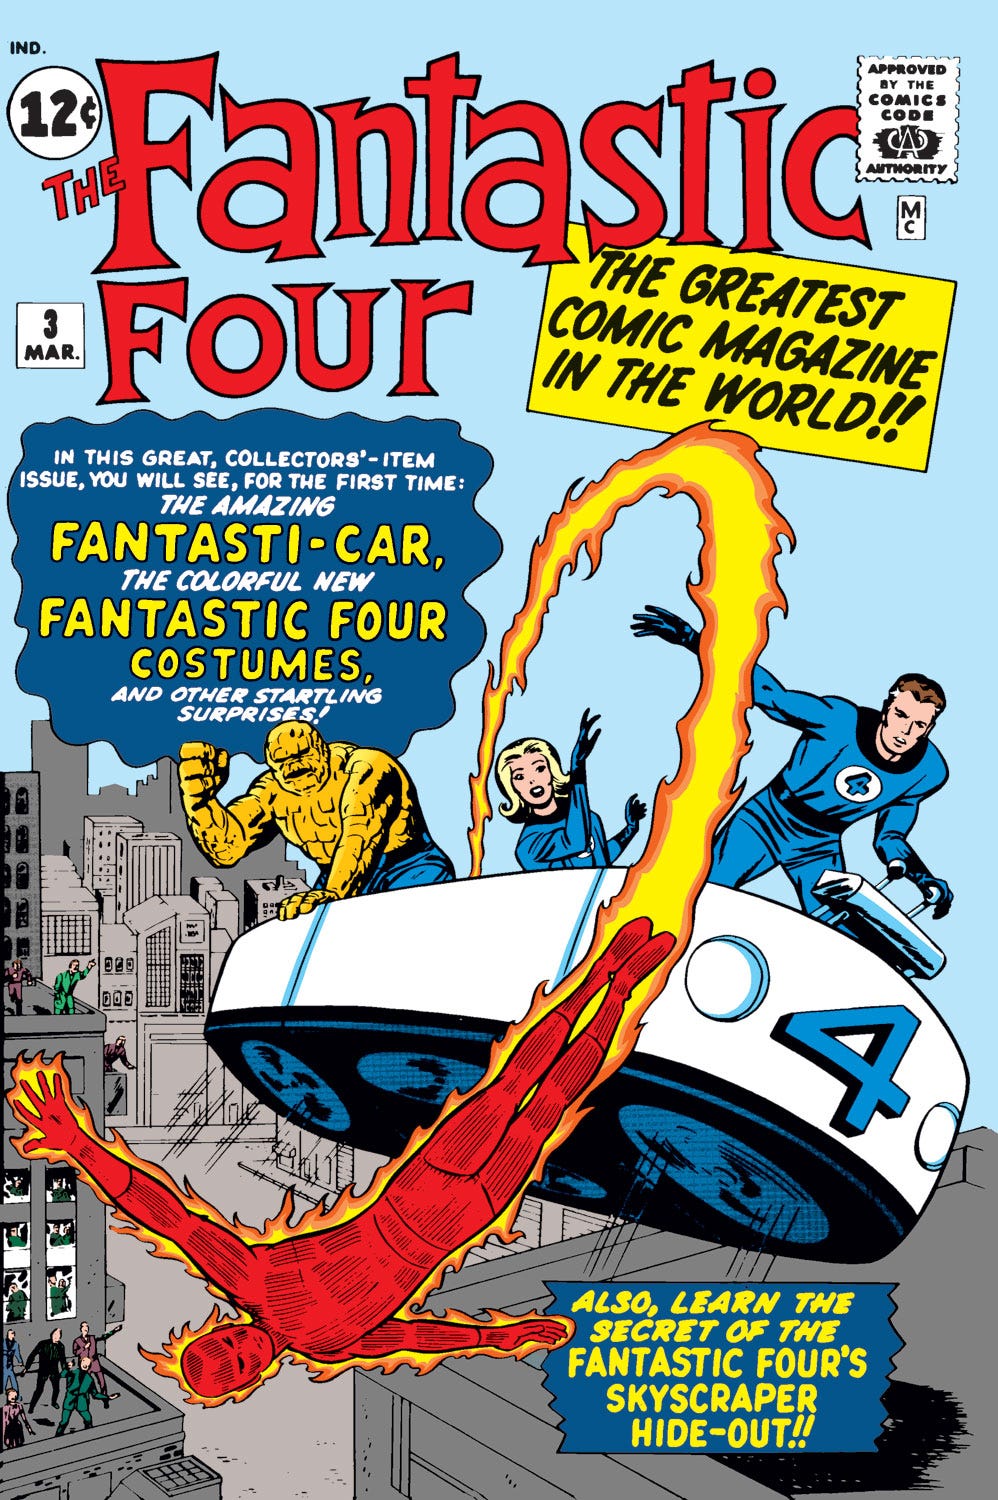 Episode 7: There are more of them (Fantastic Four #3, part 1) -- March 1962